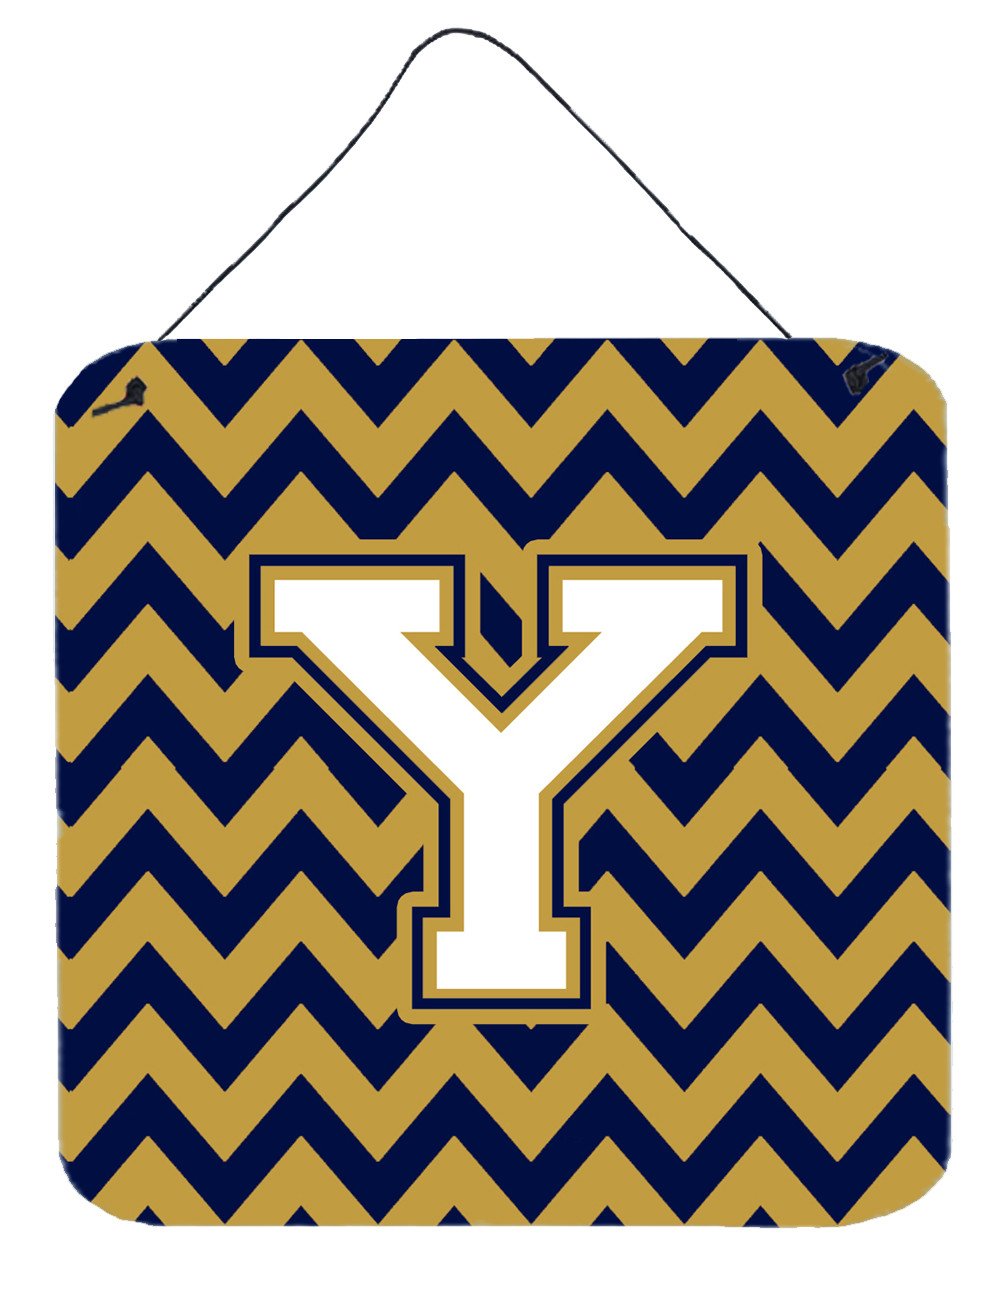 Letter Y Chevron Navy Blue and Gold Wall or Door Hanging Prints CJ1057-YDS66 by Caroline's Treasures